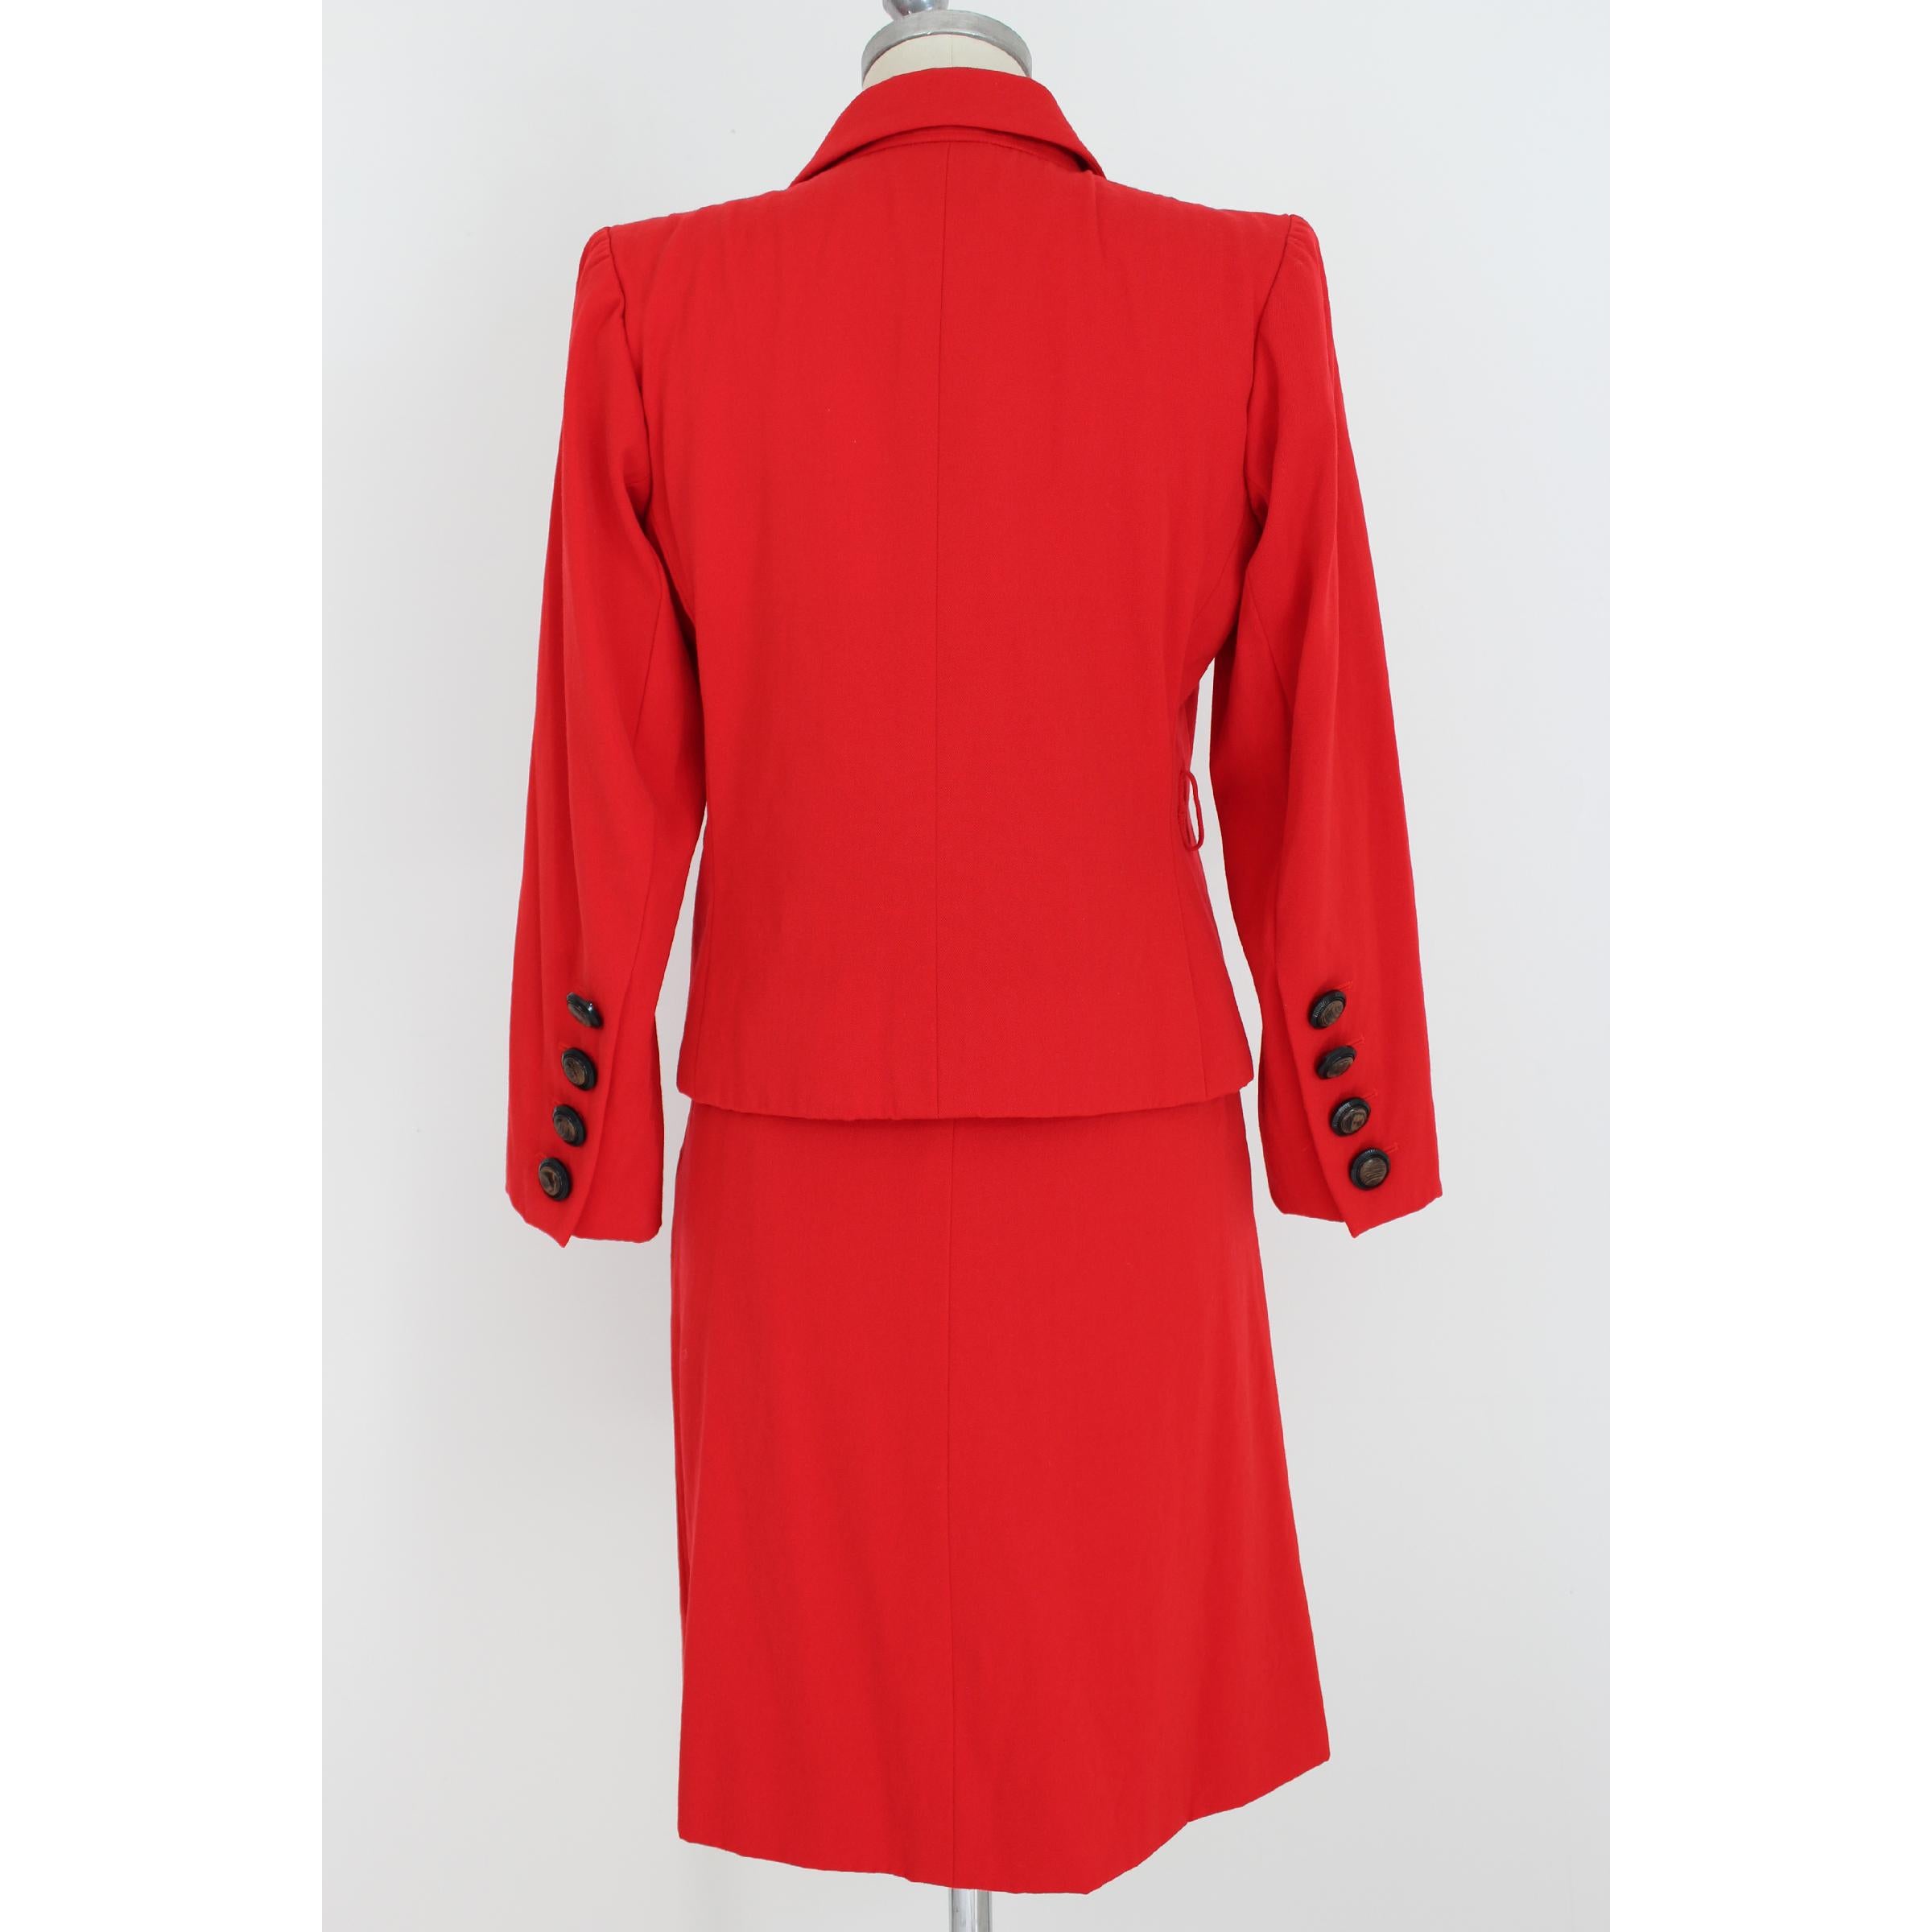 Yves Saint Laurent Rive Gauche vintage 90s skirt suit. Red color in wool. Jacket with black jeweled buttons, skirt with pockets on the sides. Made in France. Very good vintage condition, some signs of use.

Size: 36 Fr 40 It 6 Us 8 Uk

Shoulder: 42